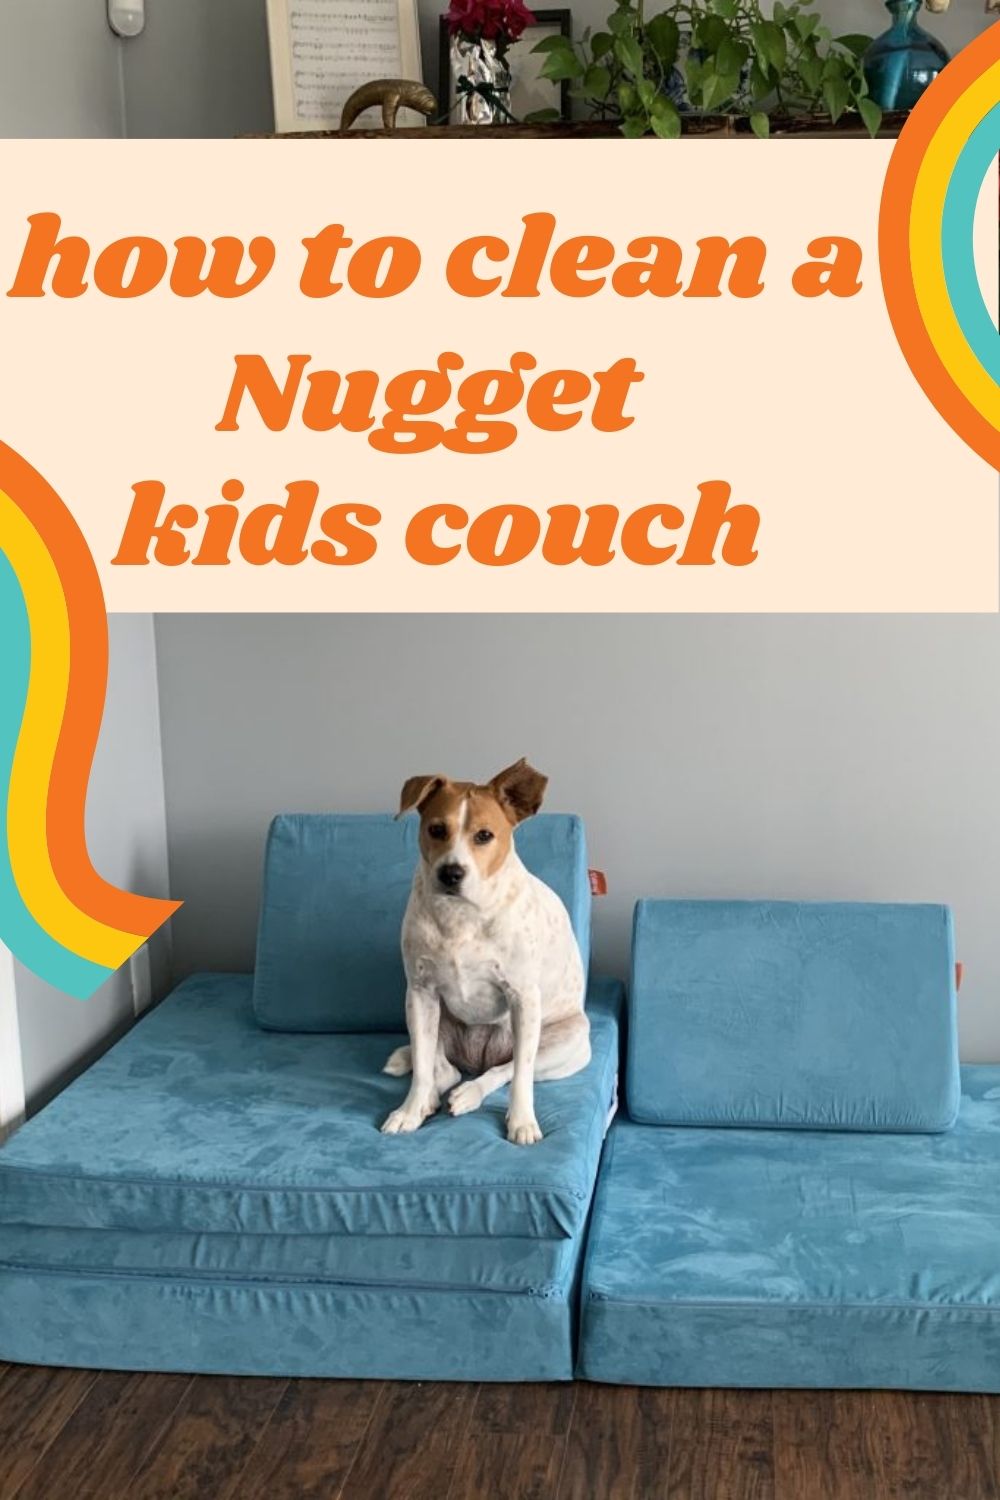 How to clean a Nugget couch - Celebrating with kids